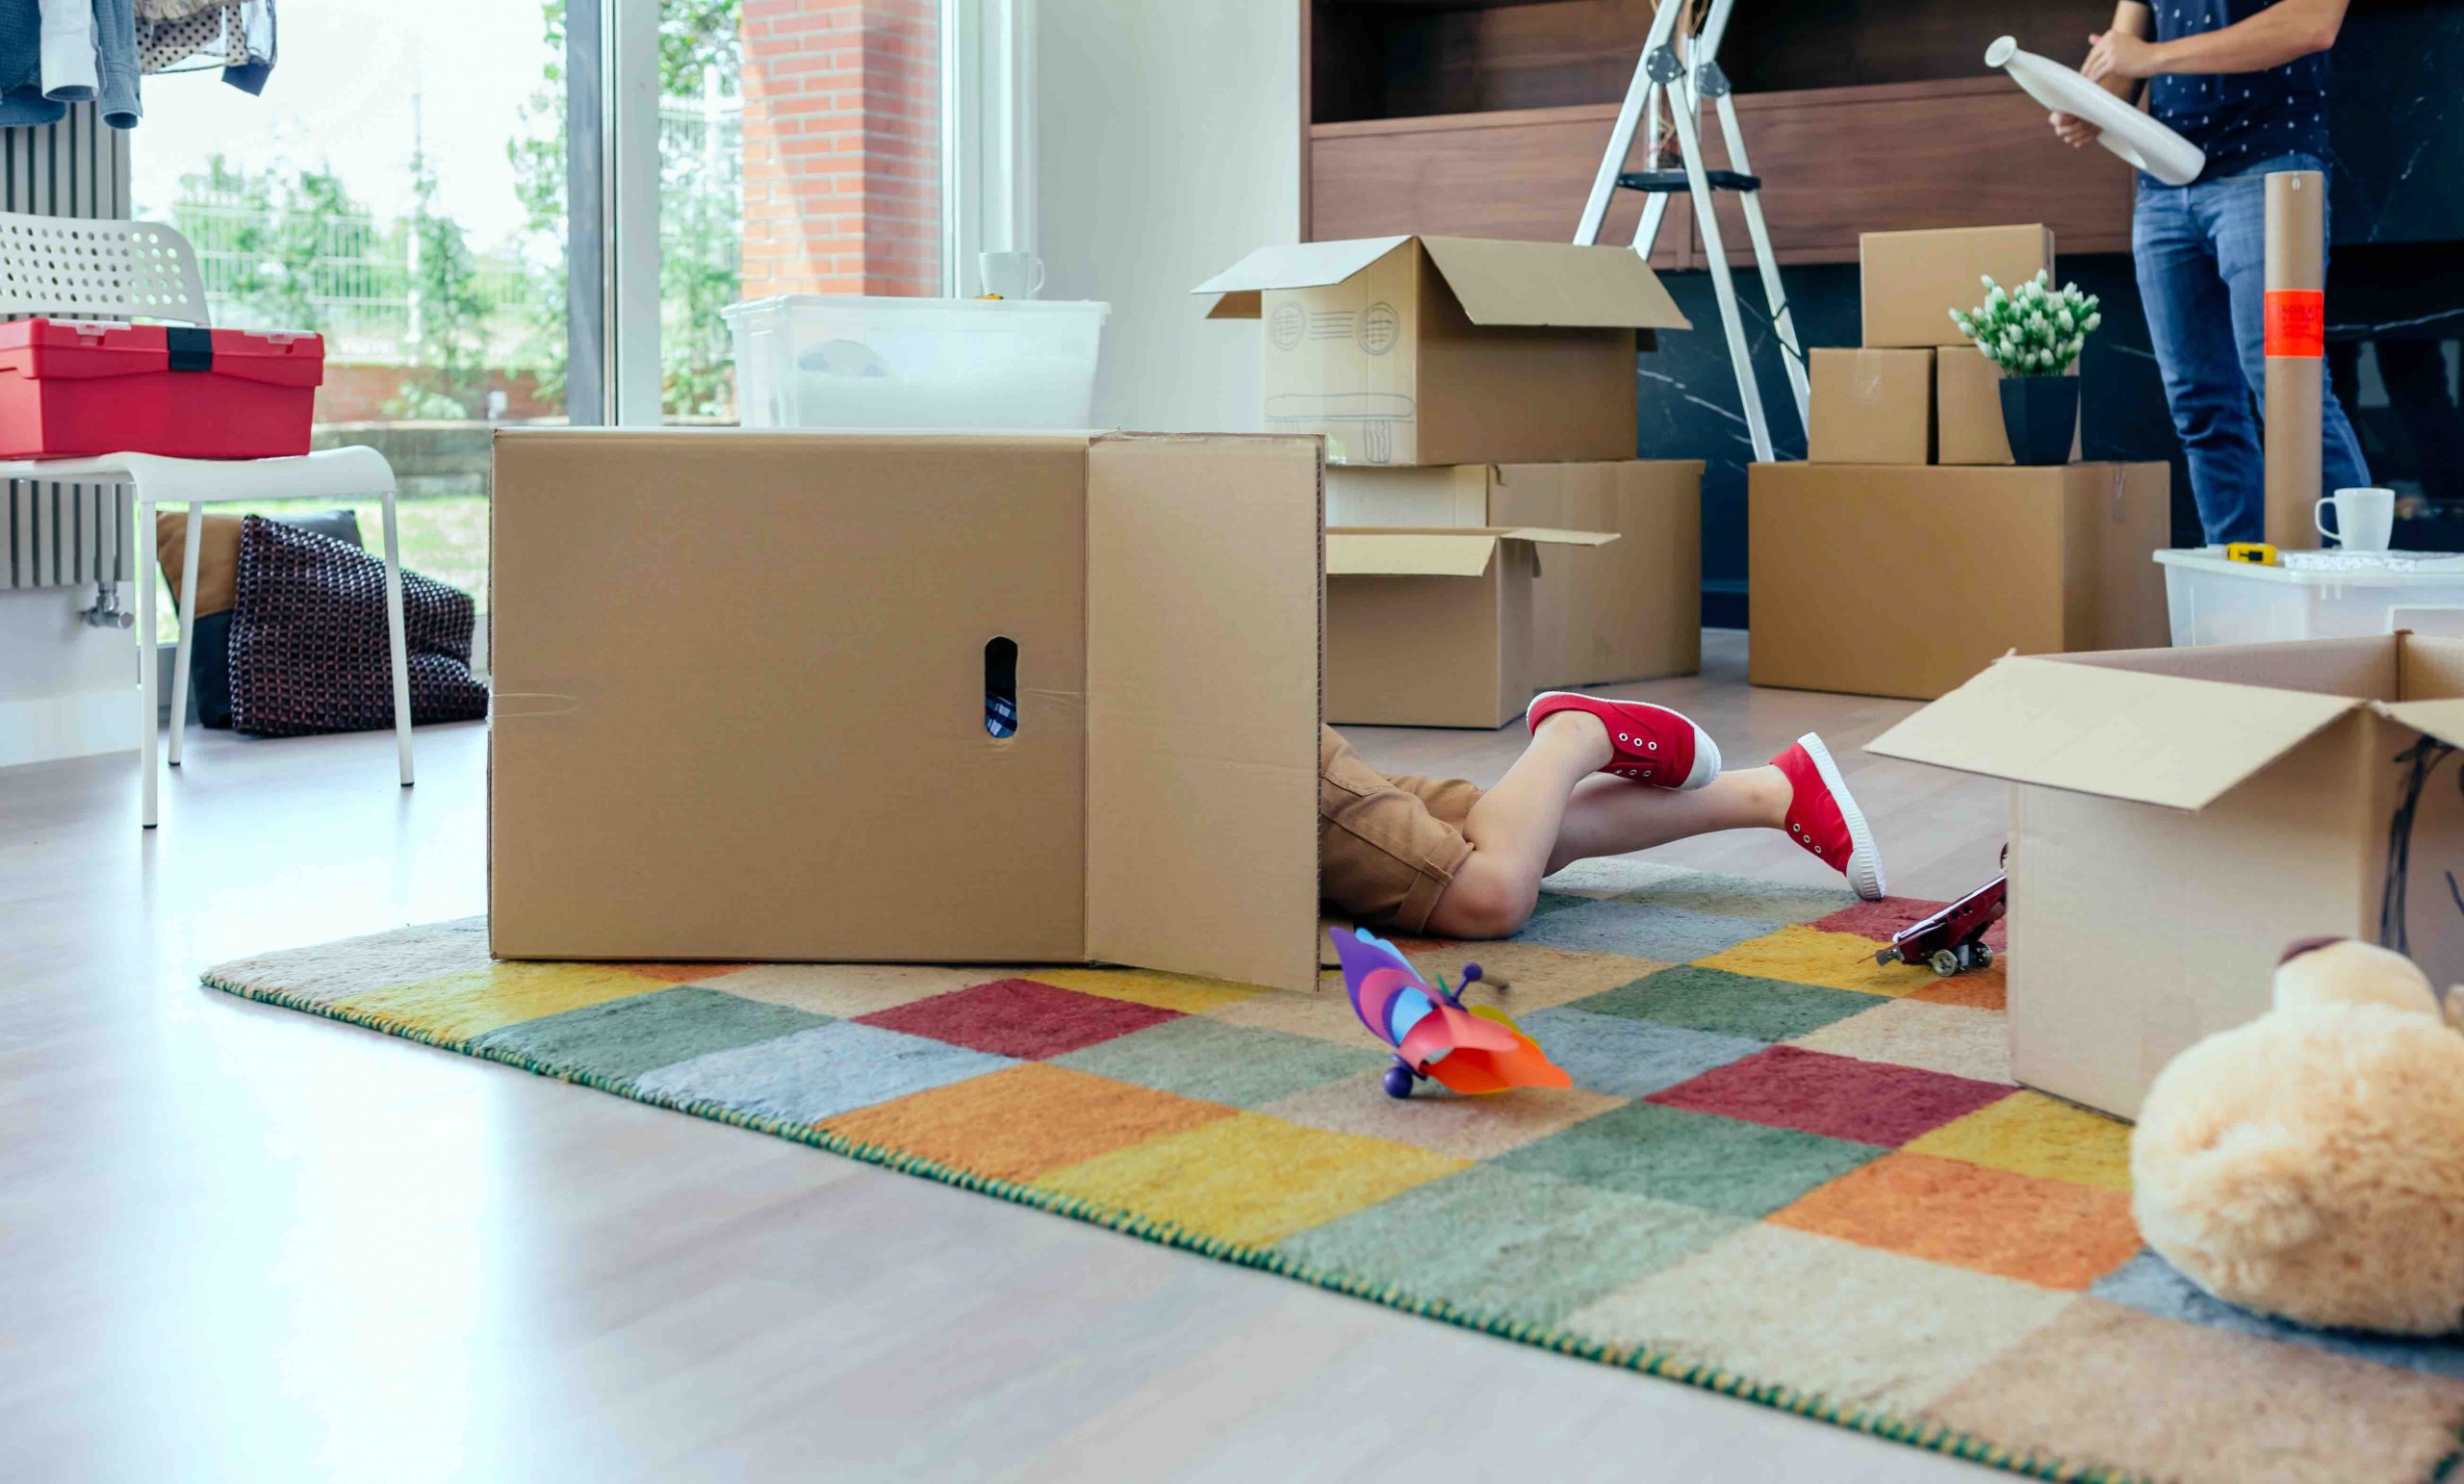 Little boy playing inside a moving box while his father unpacks in the living room